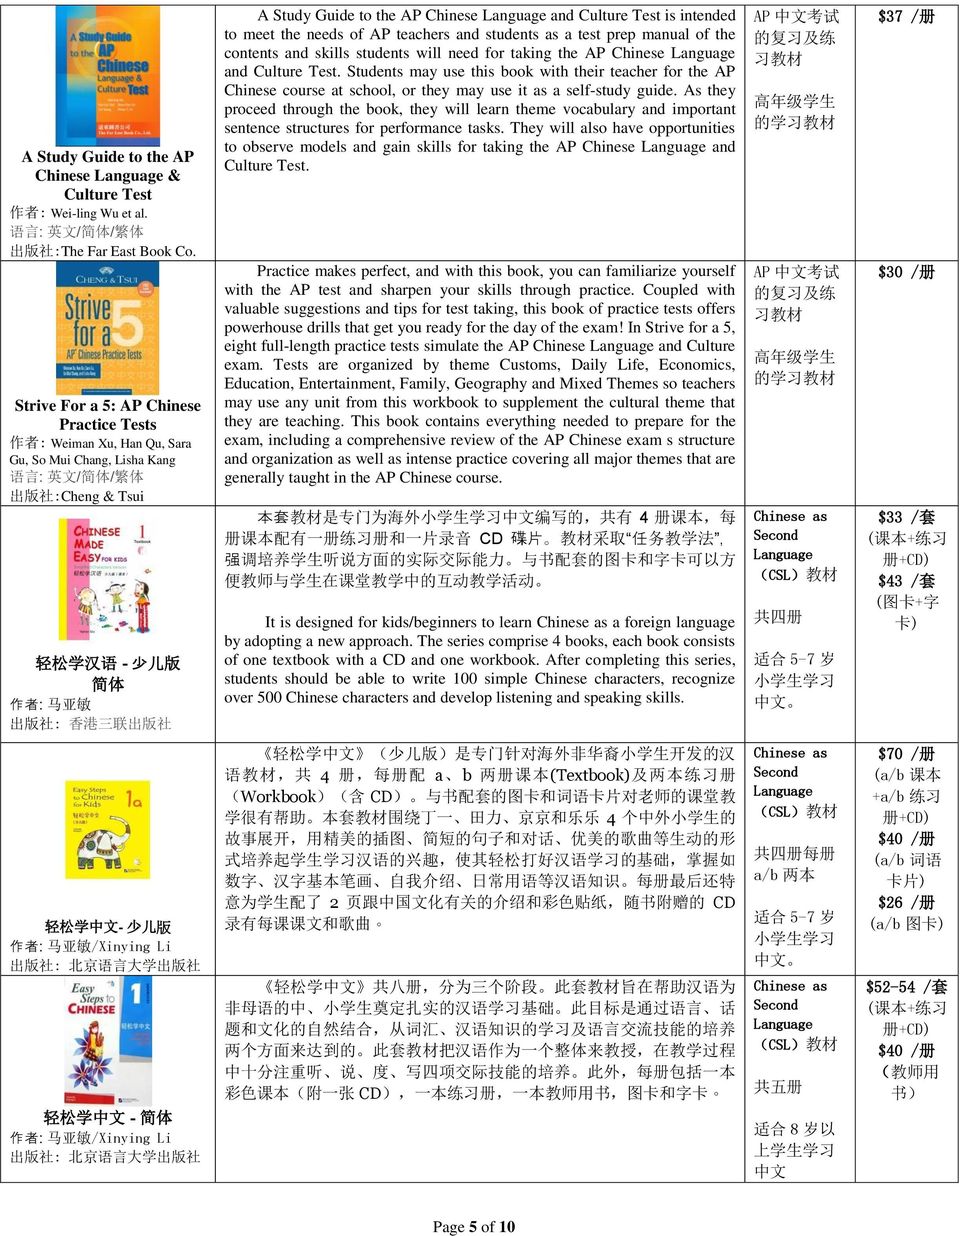 A Study Guide to the AP Chinese and Culture Test is intended to meet the needs of AP teachers and students as a test prep manual of the contents and skills students will need for taking the AP